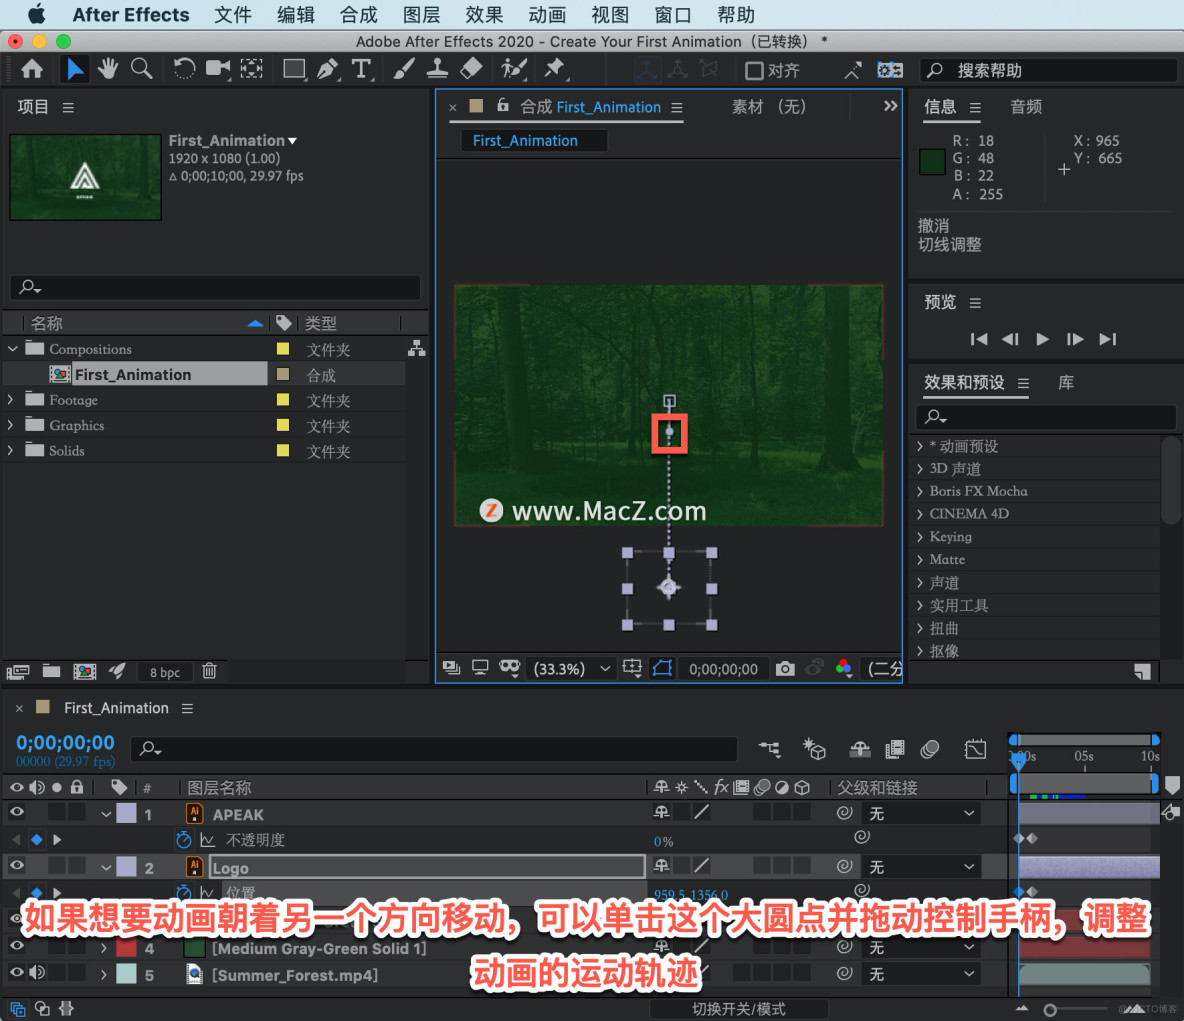 After Effects 教程，如何在 After Effects 中创建动画？_windows软件下载_07